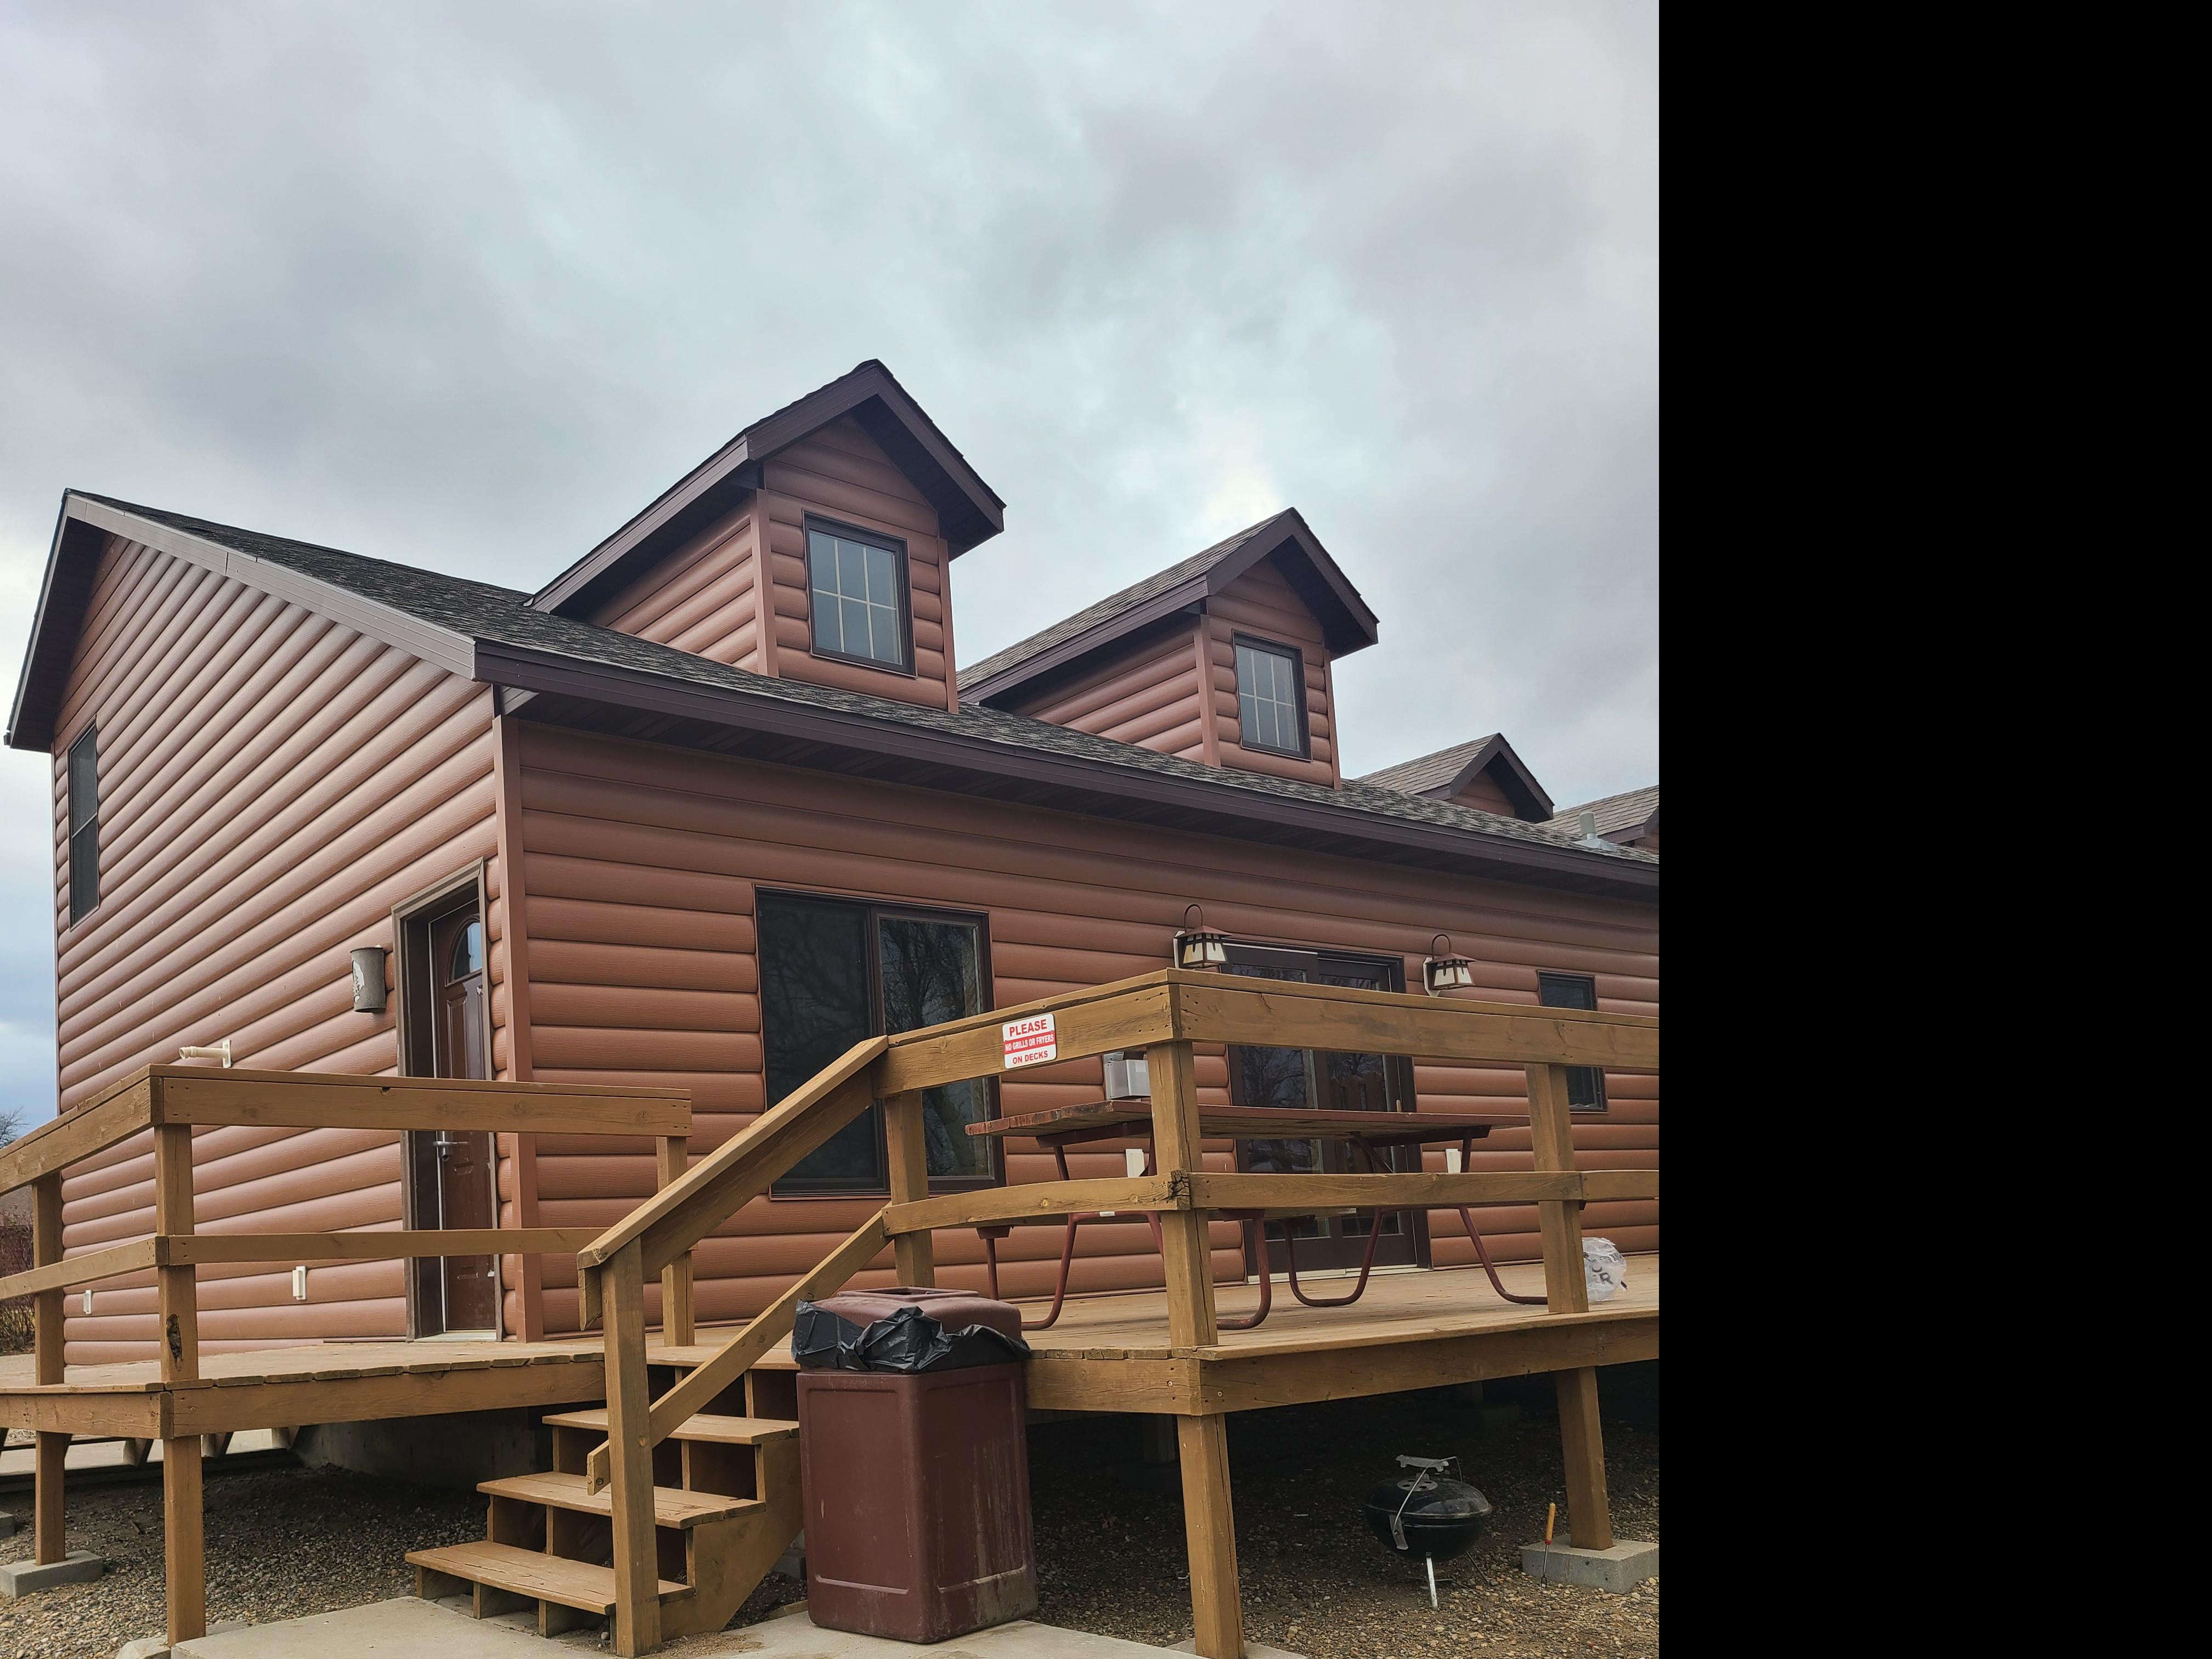 The popular lodging at Woodland Resort was built by Tad Schmidt Builders, a local general contractor of the Devils Lake, North Dakota area.